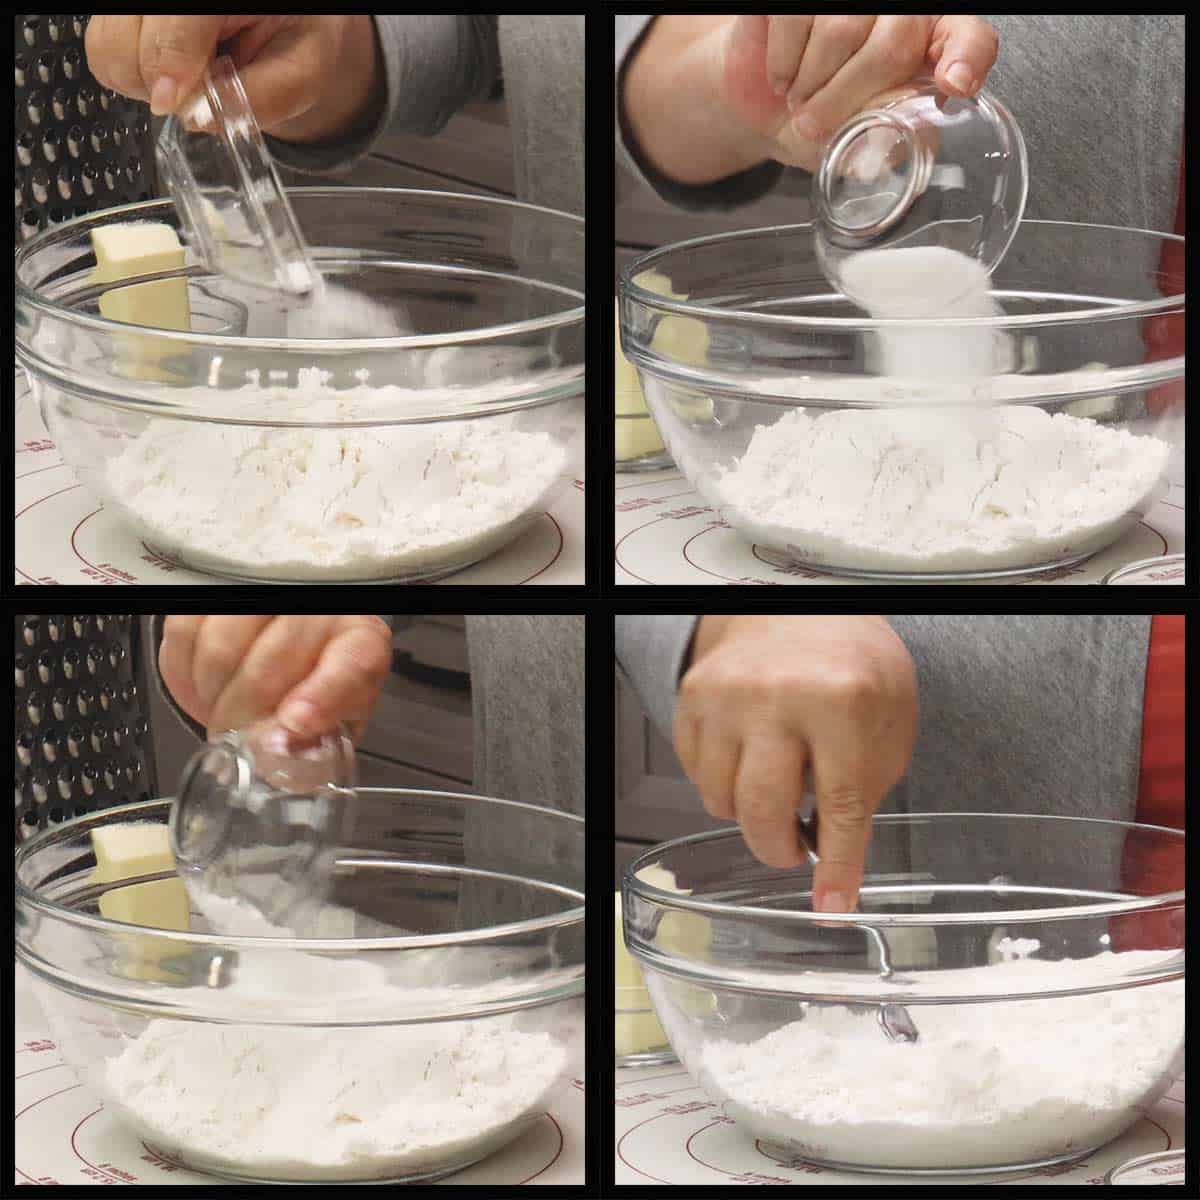 Mixing dry ingredients in bowl for scone dough.